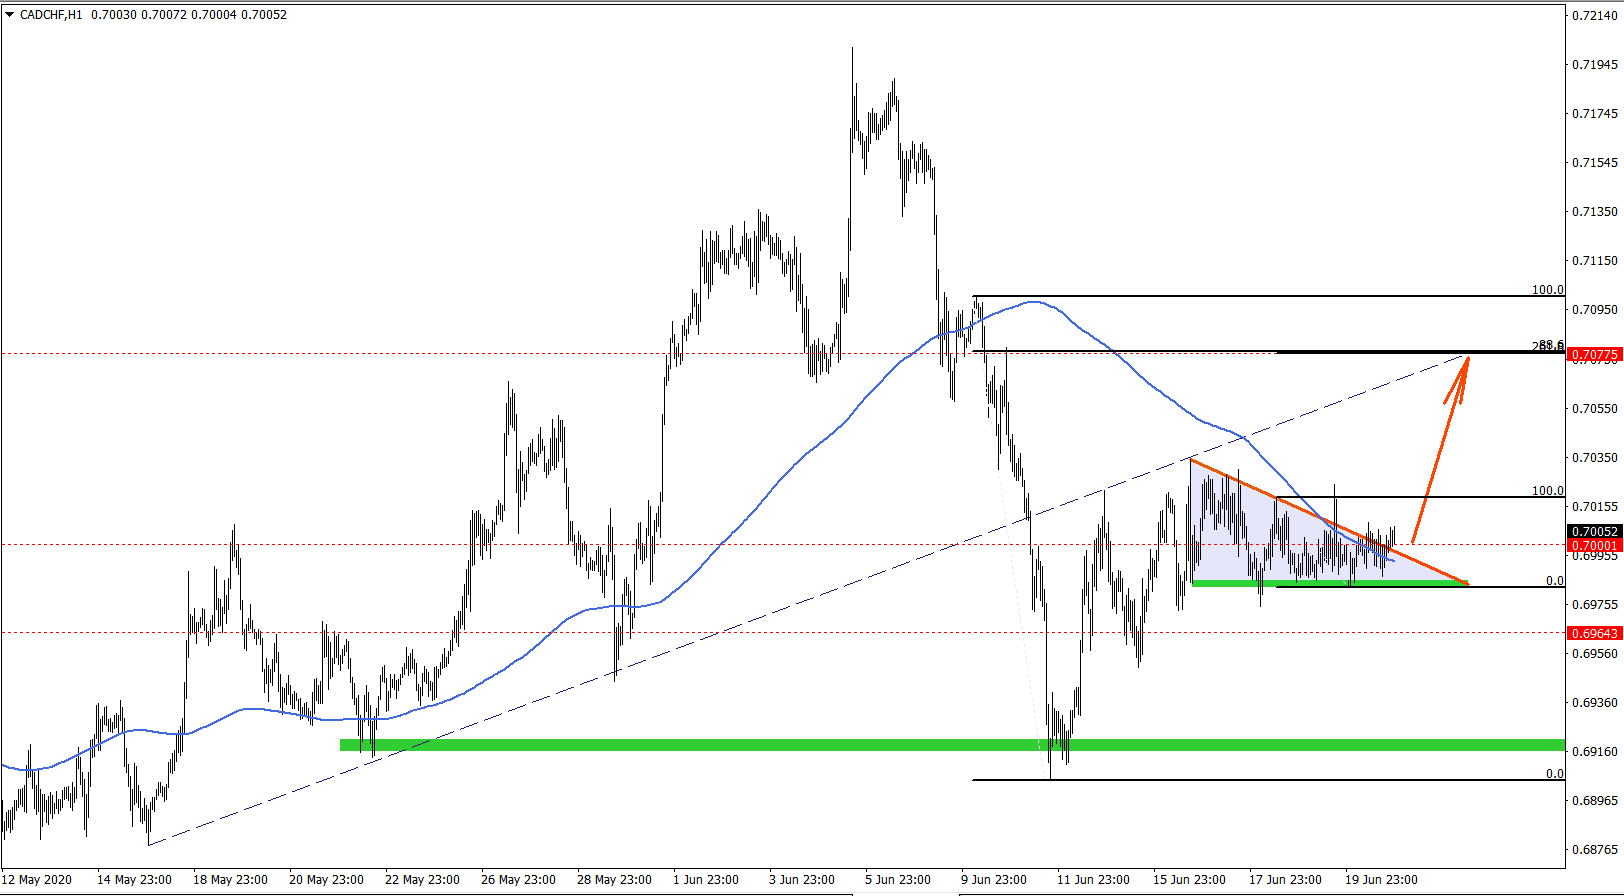 CADCHF Daily Chart on June 22 2020